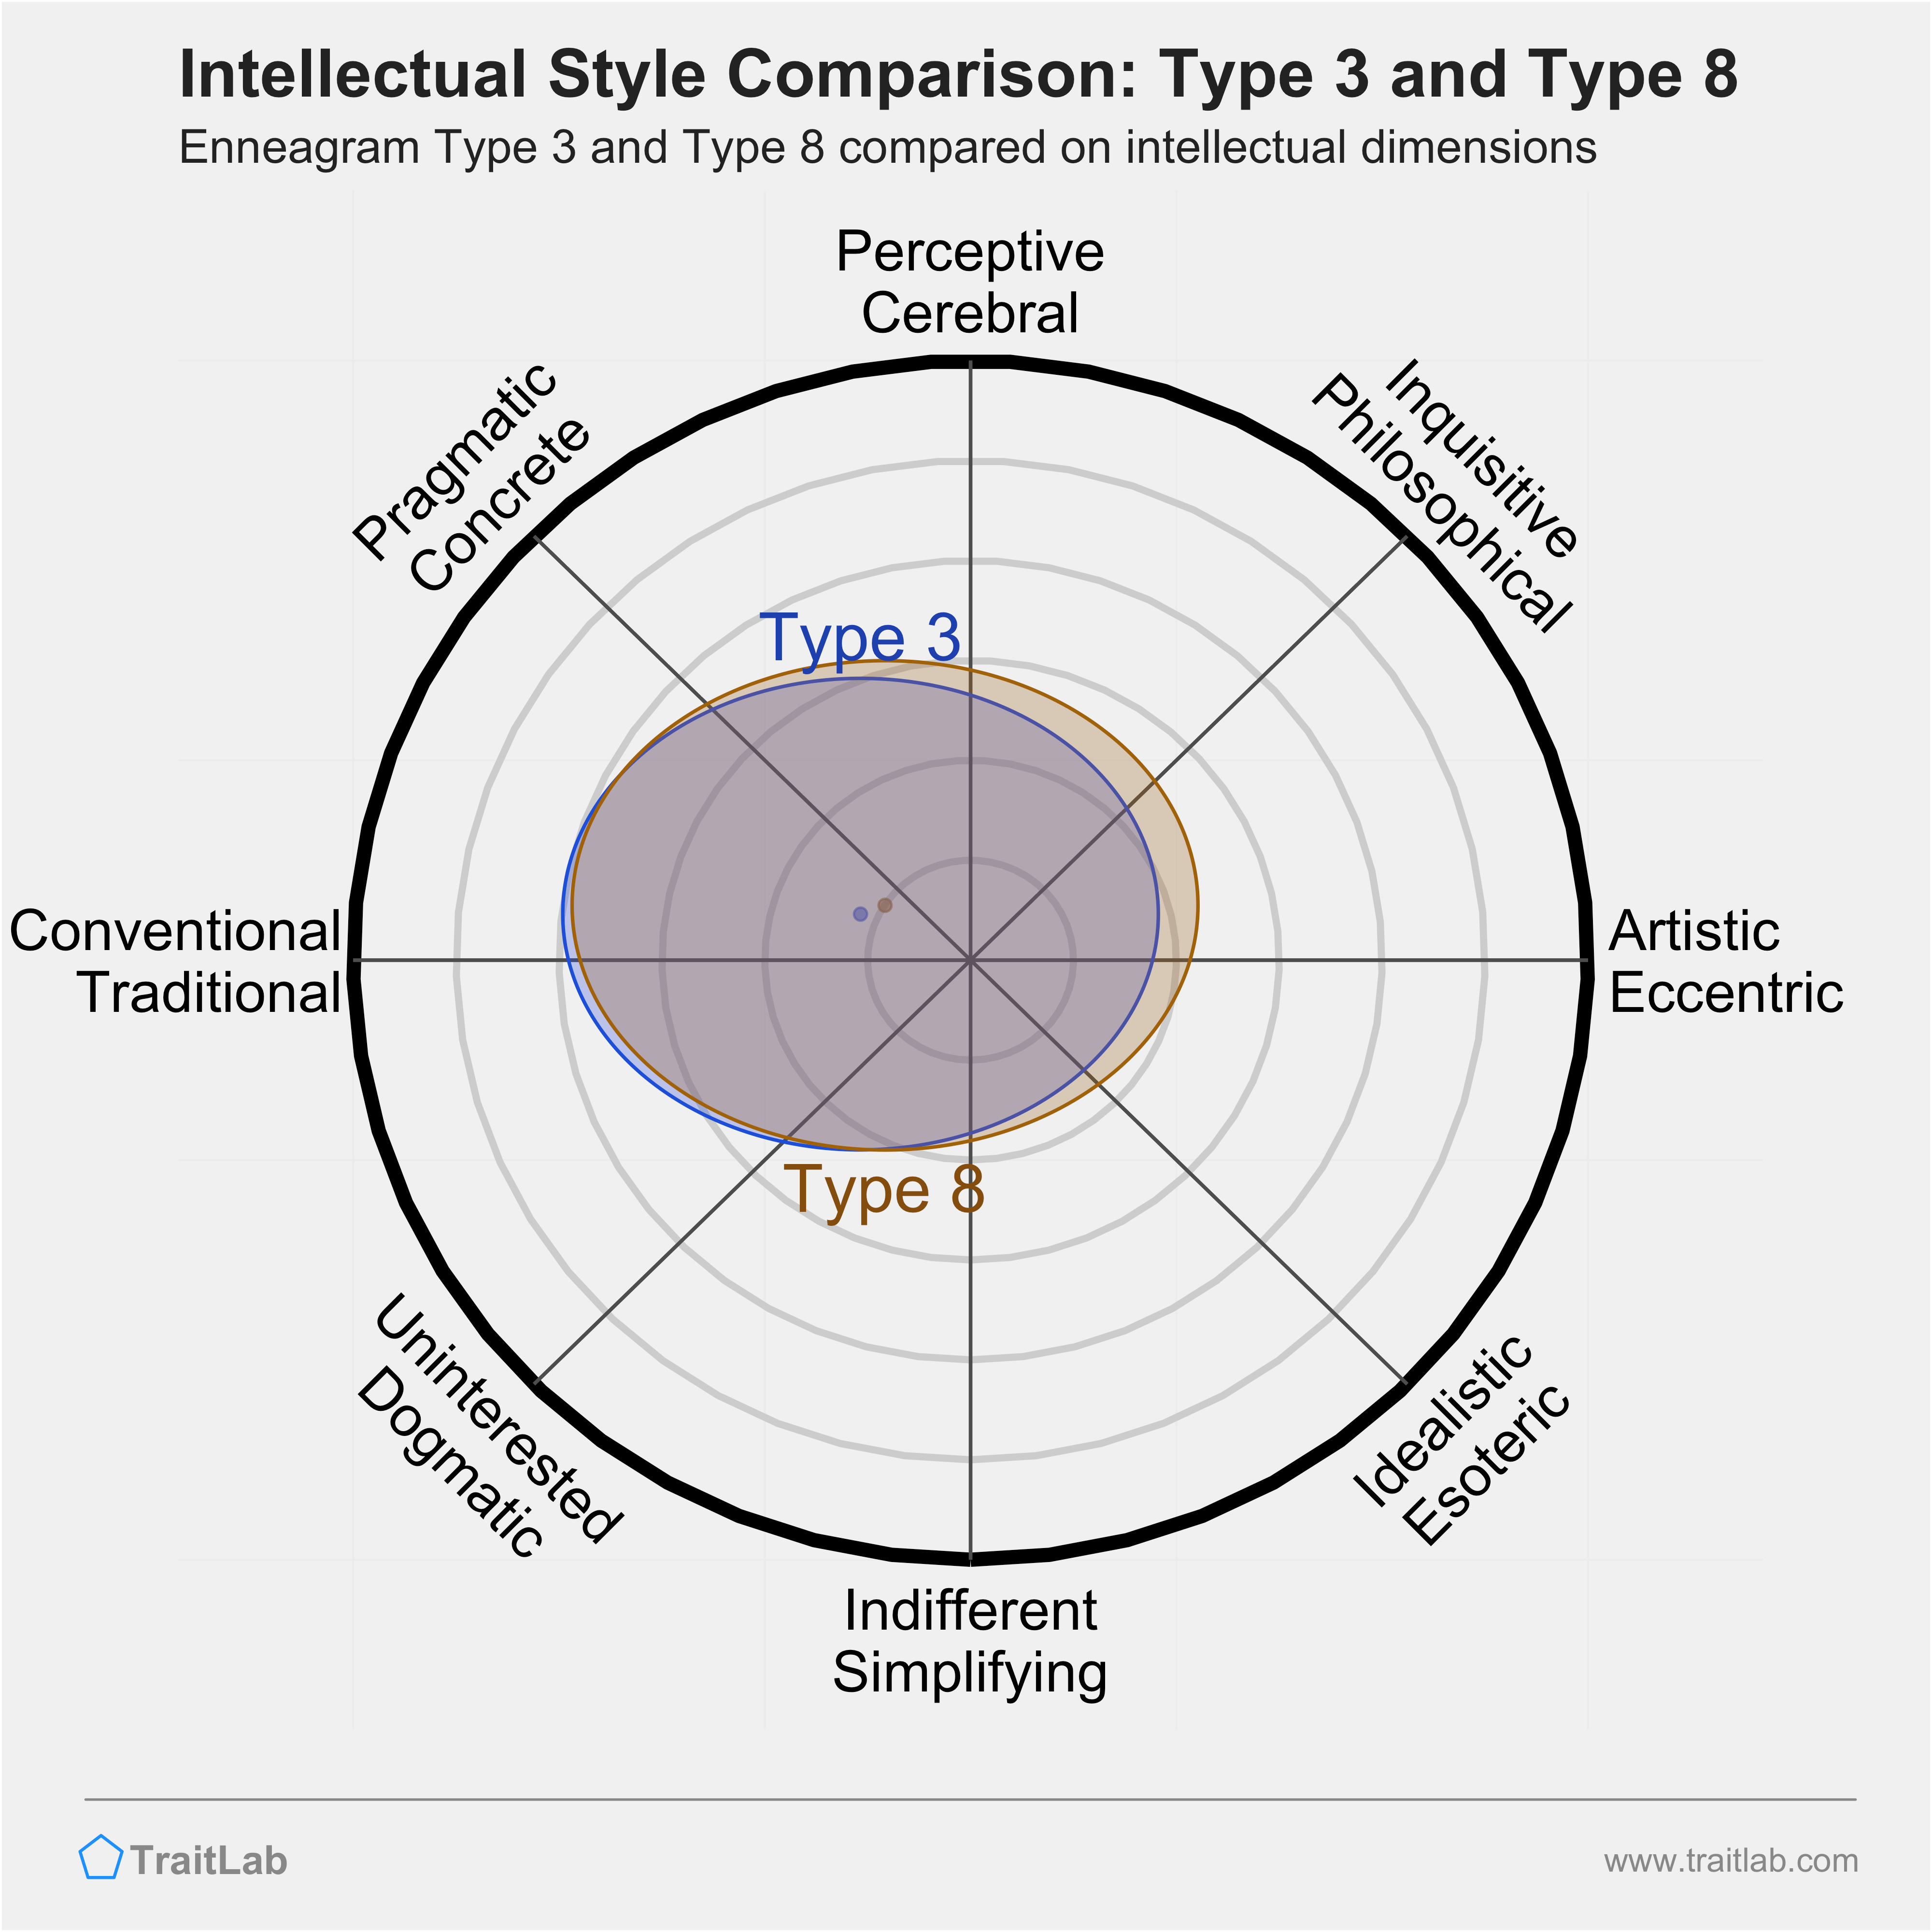 Type 3 and Type 8 comparison across intellectual dimensions